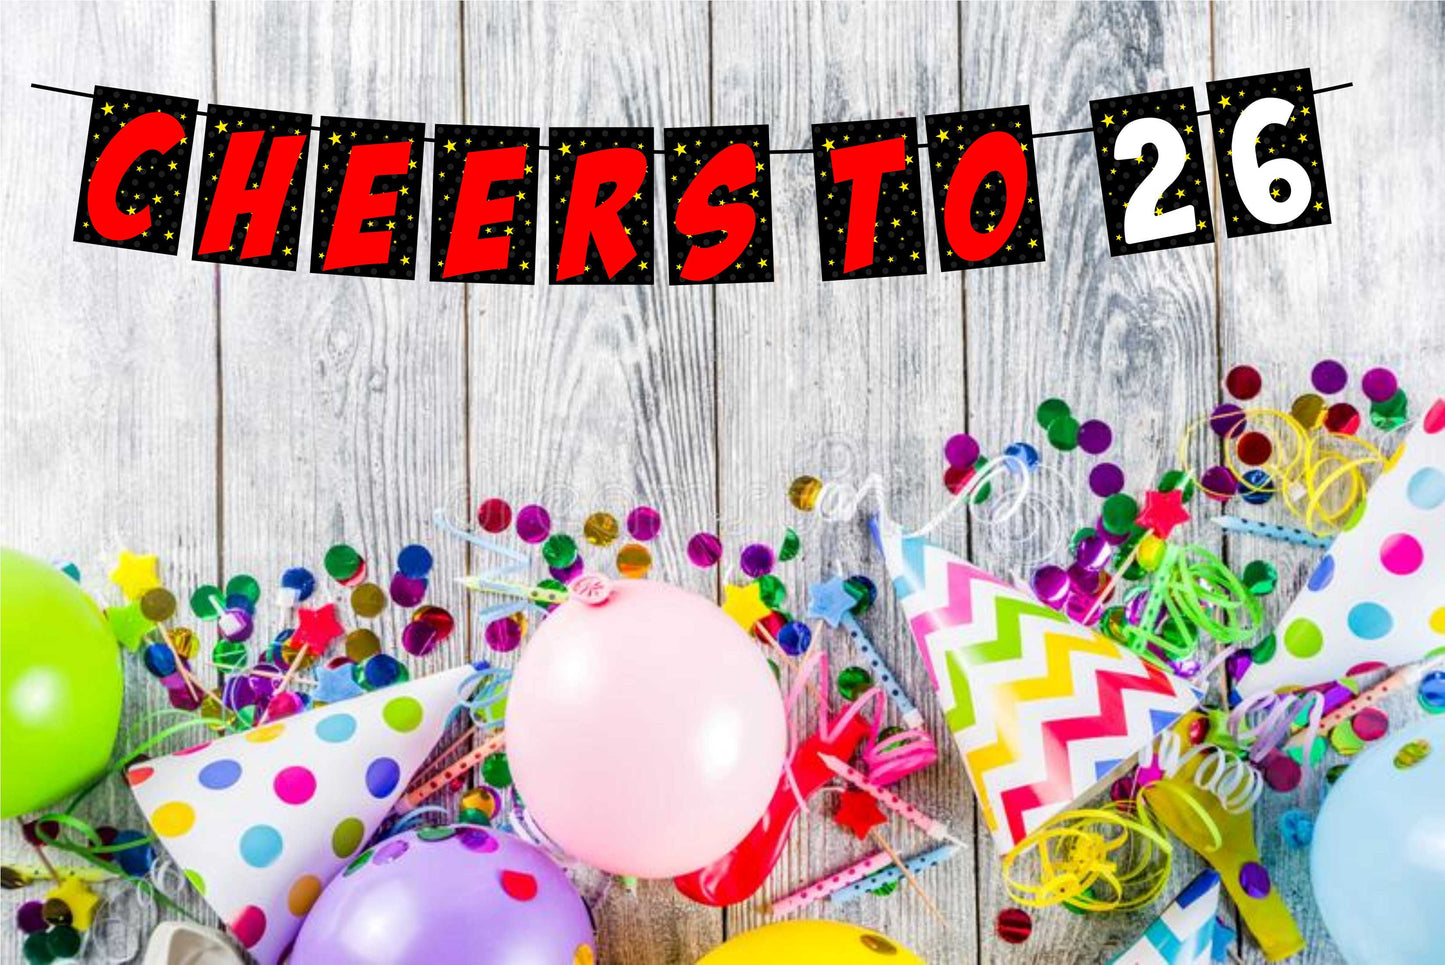 Cheers to 26 Birthday Banner for Photo Shoot Backdrop and Theme Party